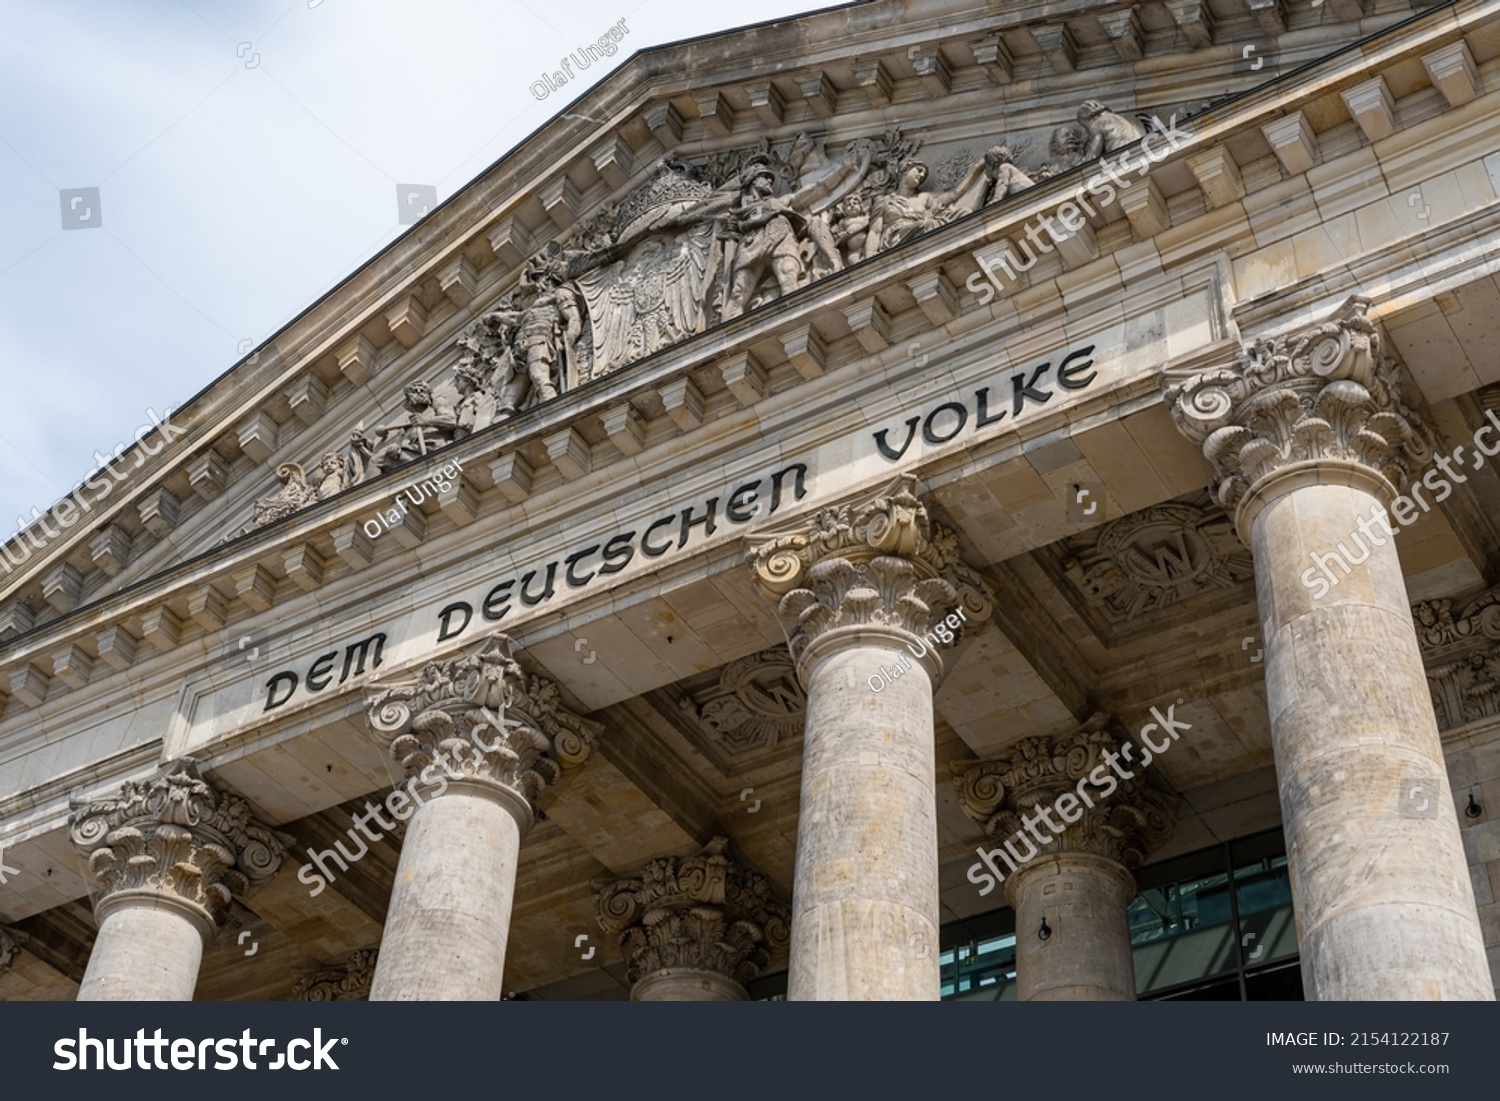 The Reichstag building (Bundestag) in Berlin, Germany, meeting place of the German parliament: The inscription says: Dem Deutschen Volke - To the German people #2154122187